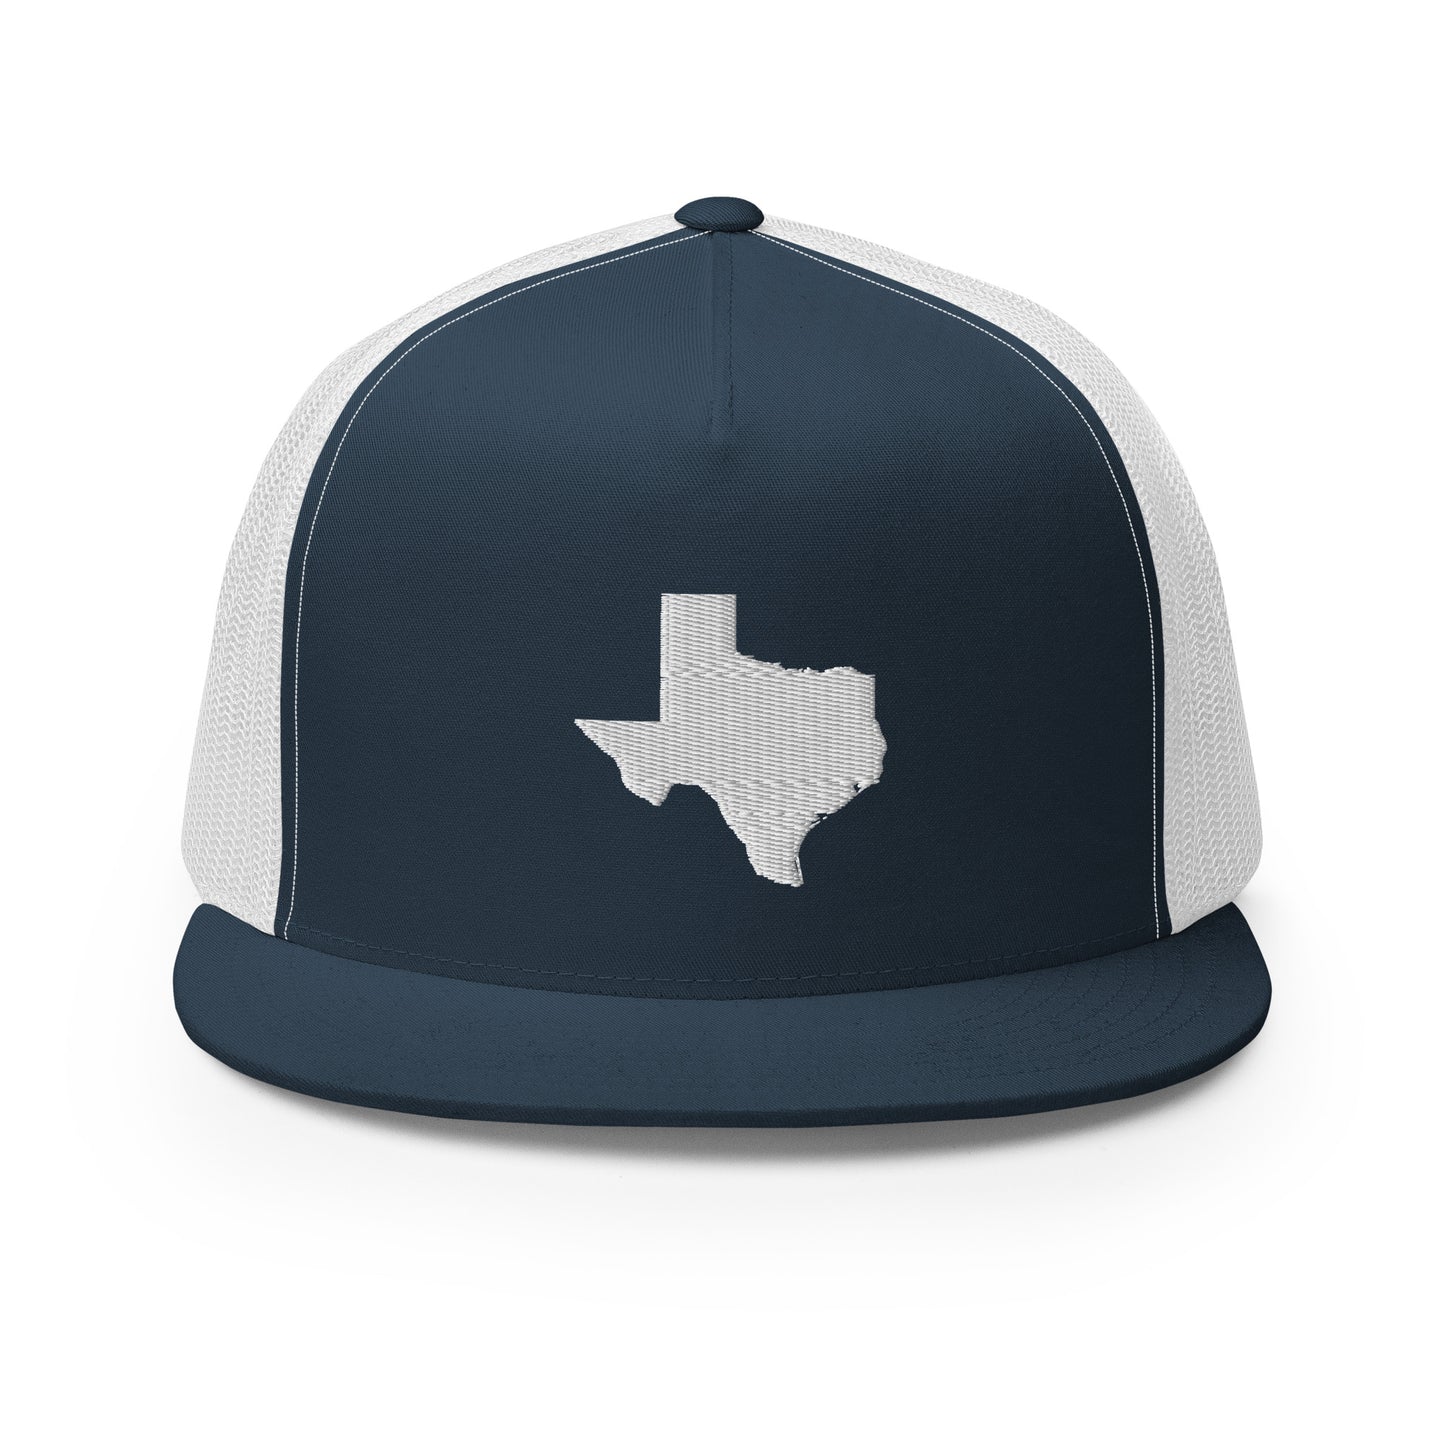 Texas State Silhouette High 5 Panel A-Frame Snapback Trucker Hat